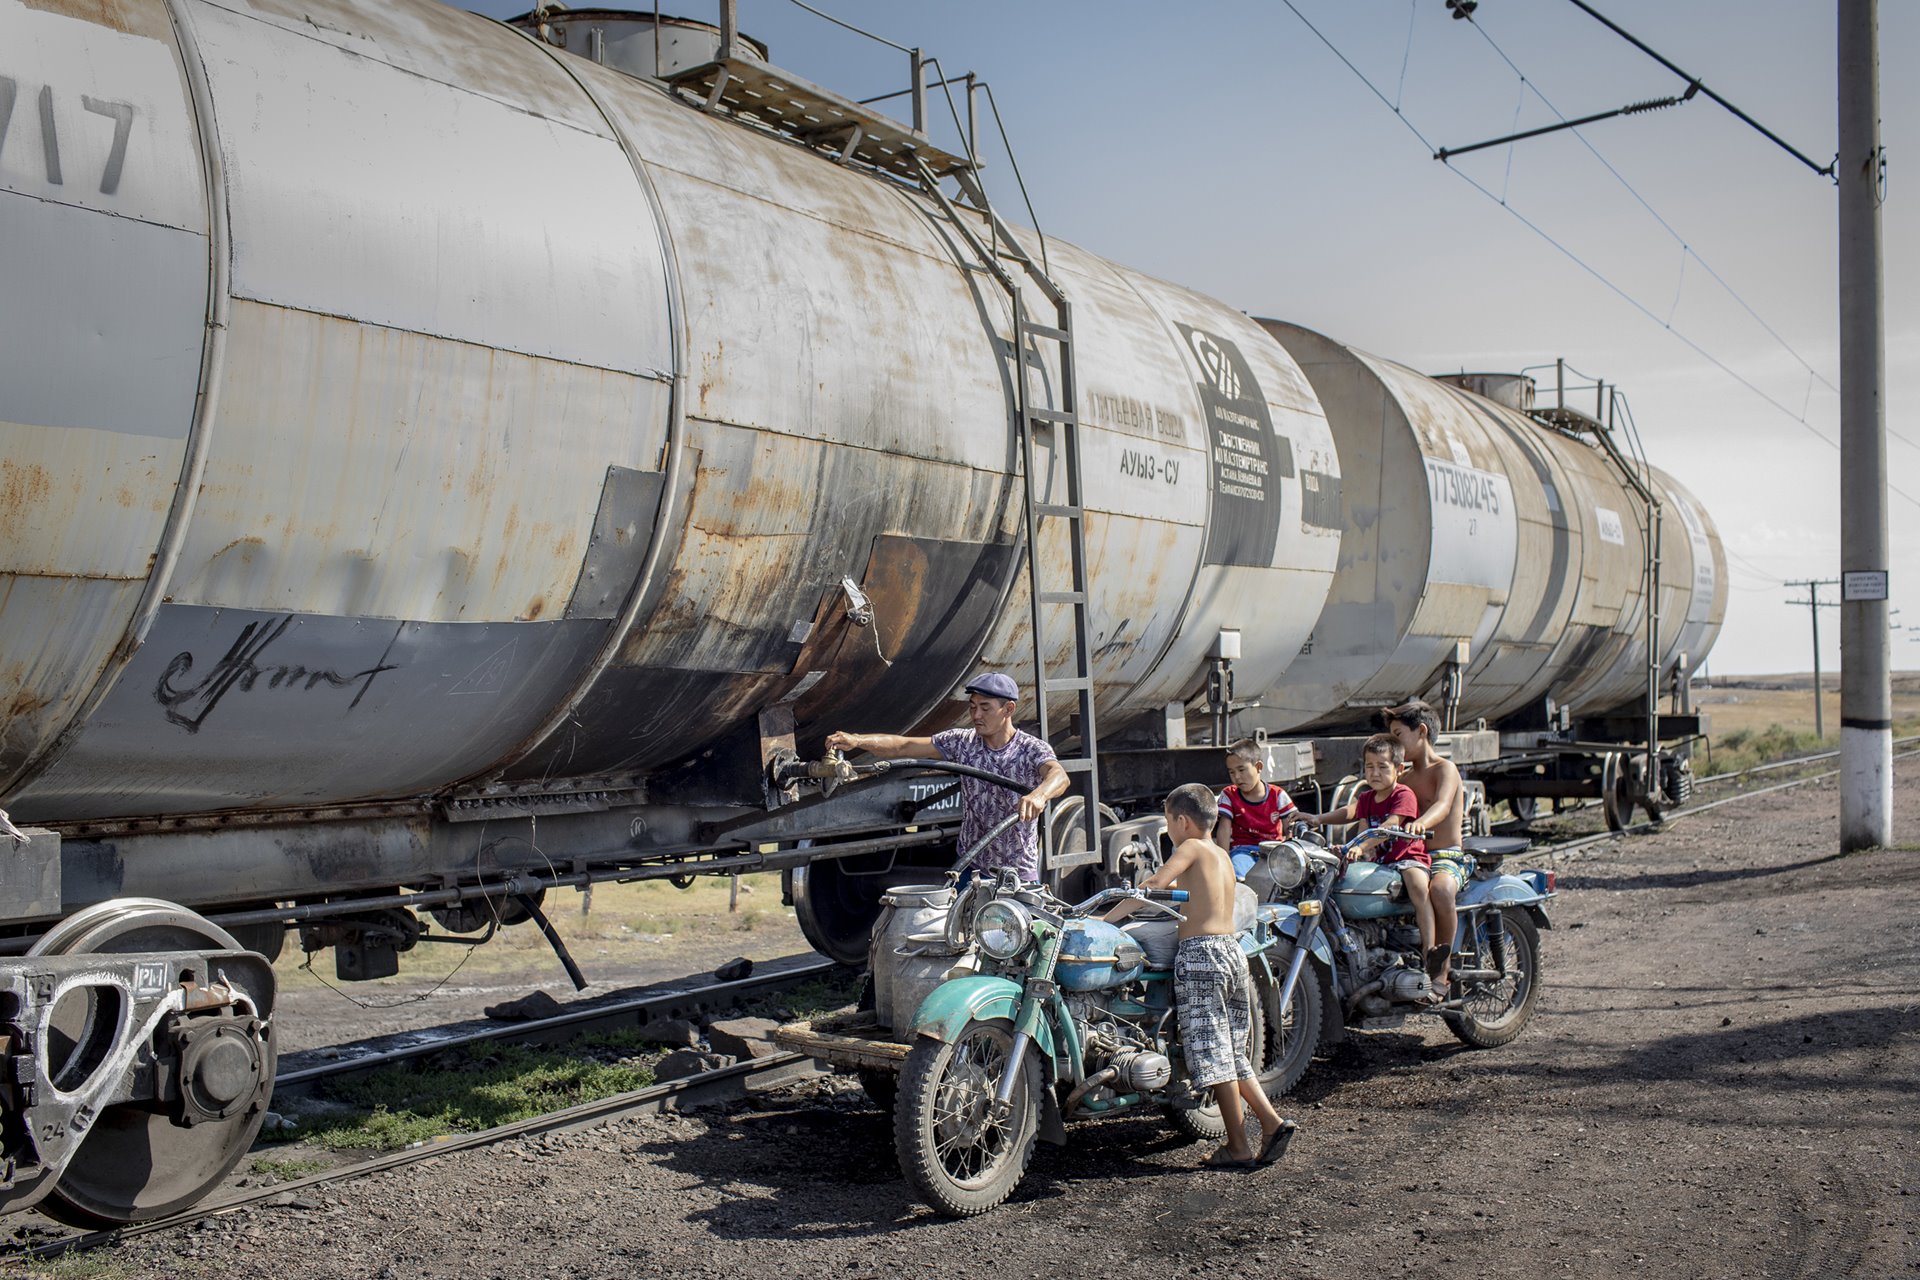 People fill containers with water in Kiyakhty, Kazakhstan, south-west of Lake Balkhash. Water is scarce in much of the surrounding Jambyl region; in Kiyakhty, the single source of water is a wagon train arriving once every two weeks.